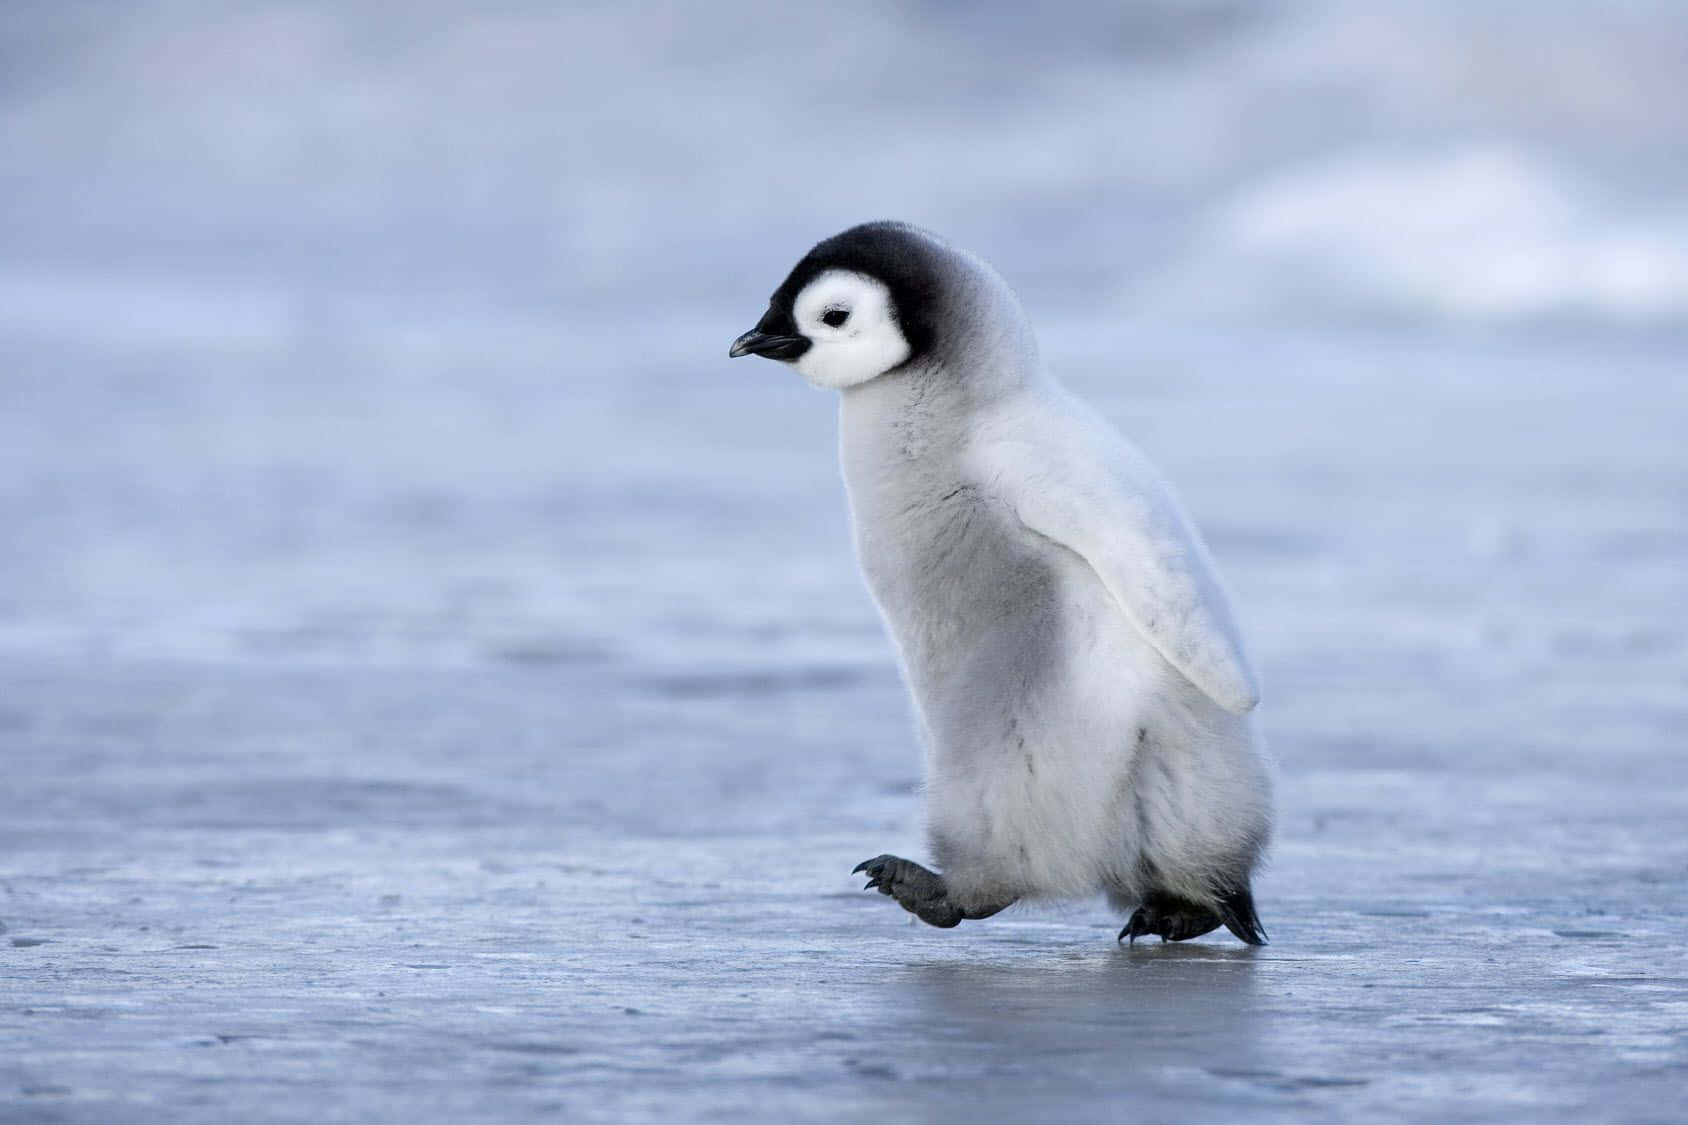 Adorable baby penguin taking a leisurely stroll.